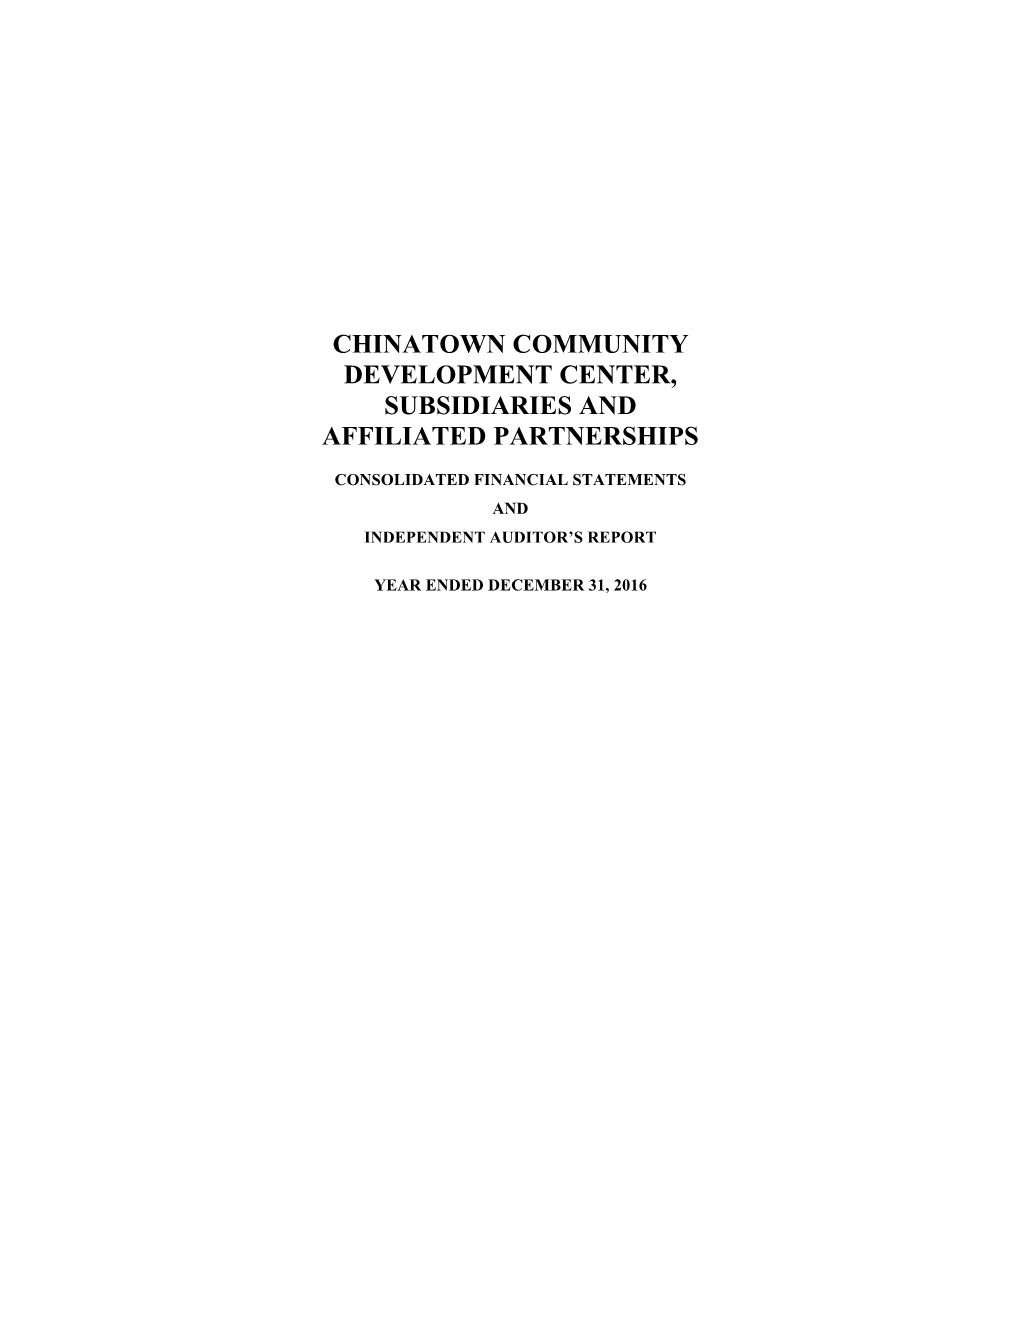 Chinatown Community Development Center, Subsidiaries and Affiliated Partnerships